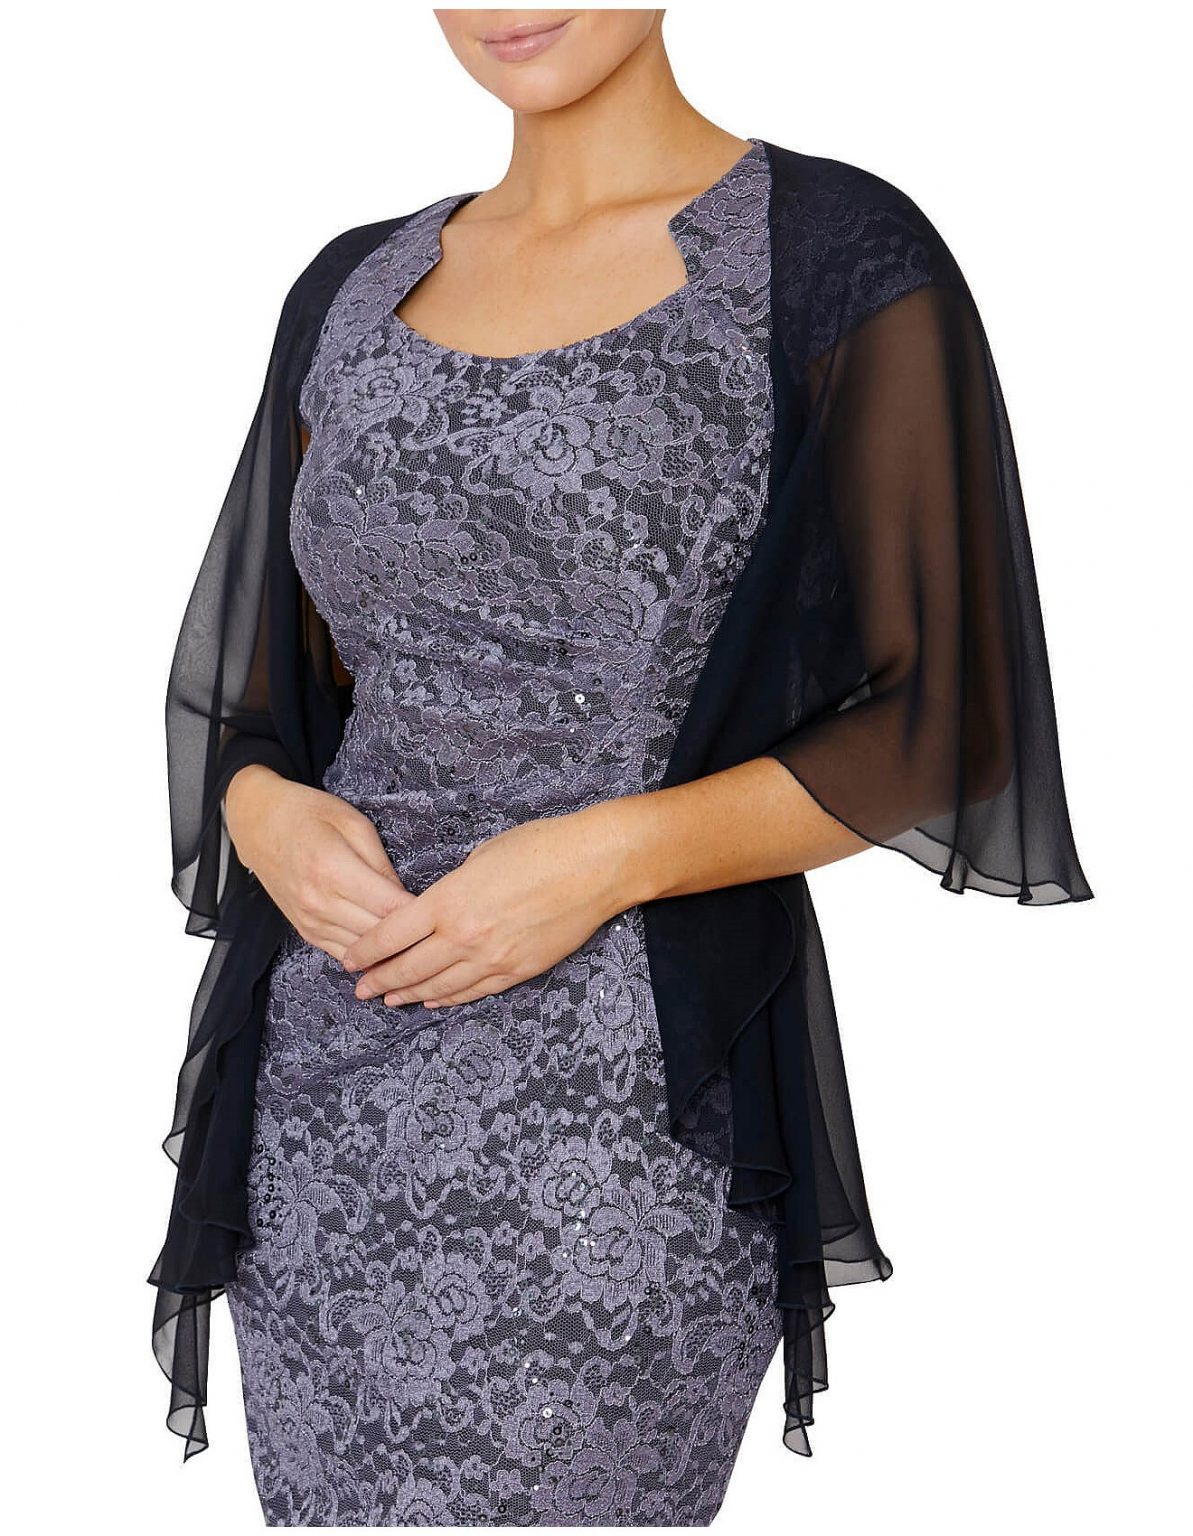 sales - HELENA STRETCH LACE DRESS Anthea Crawford Outlet with discount 61%